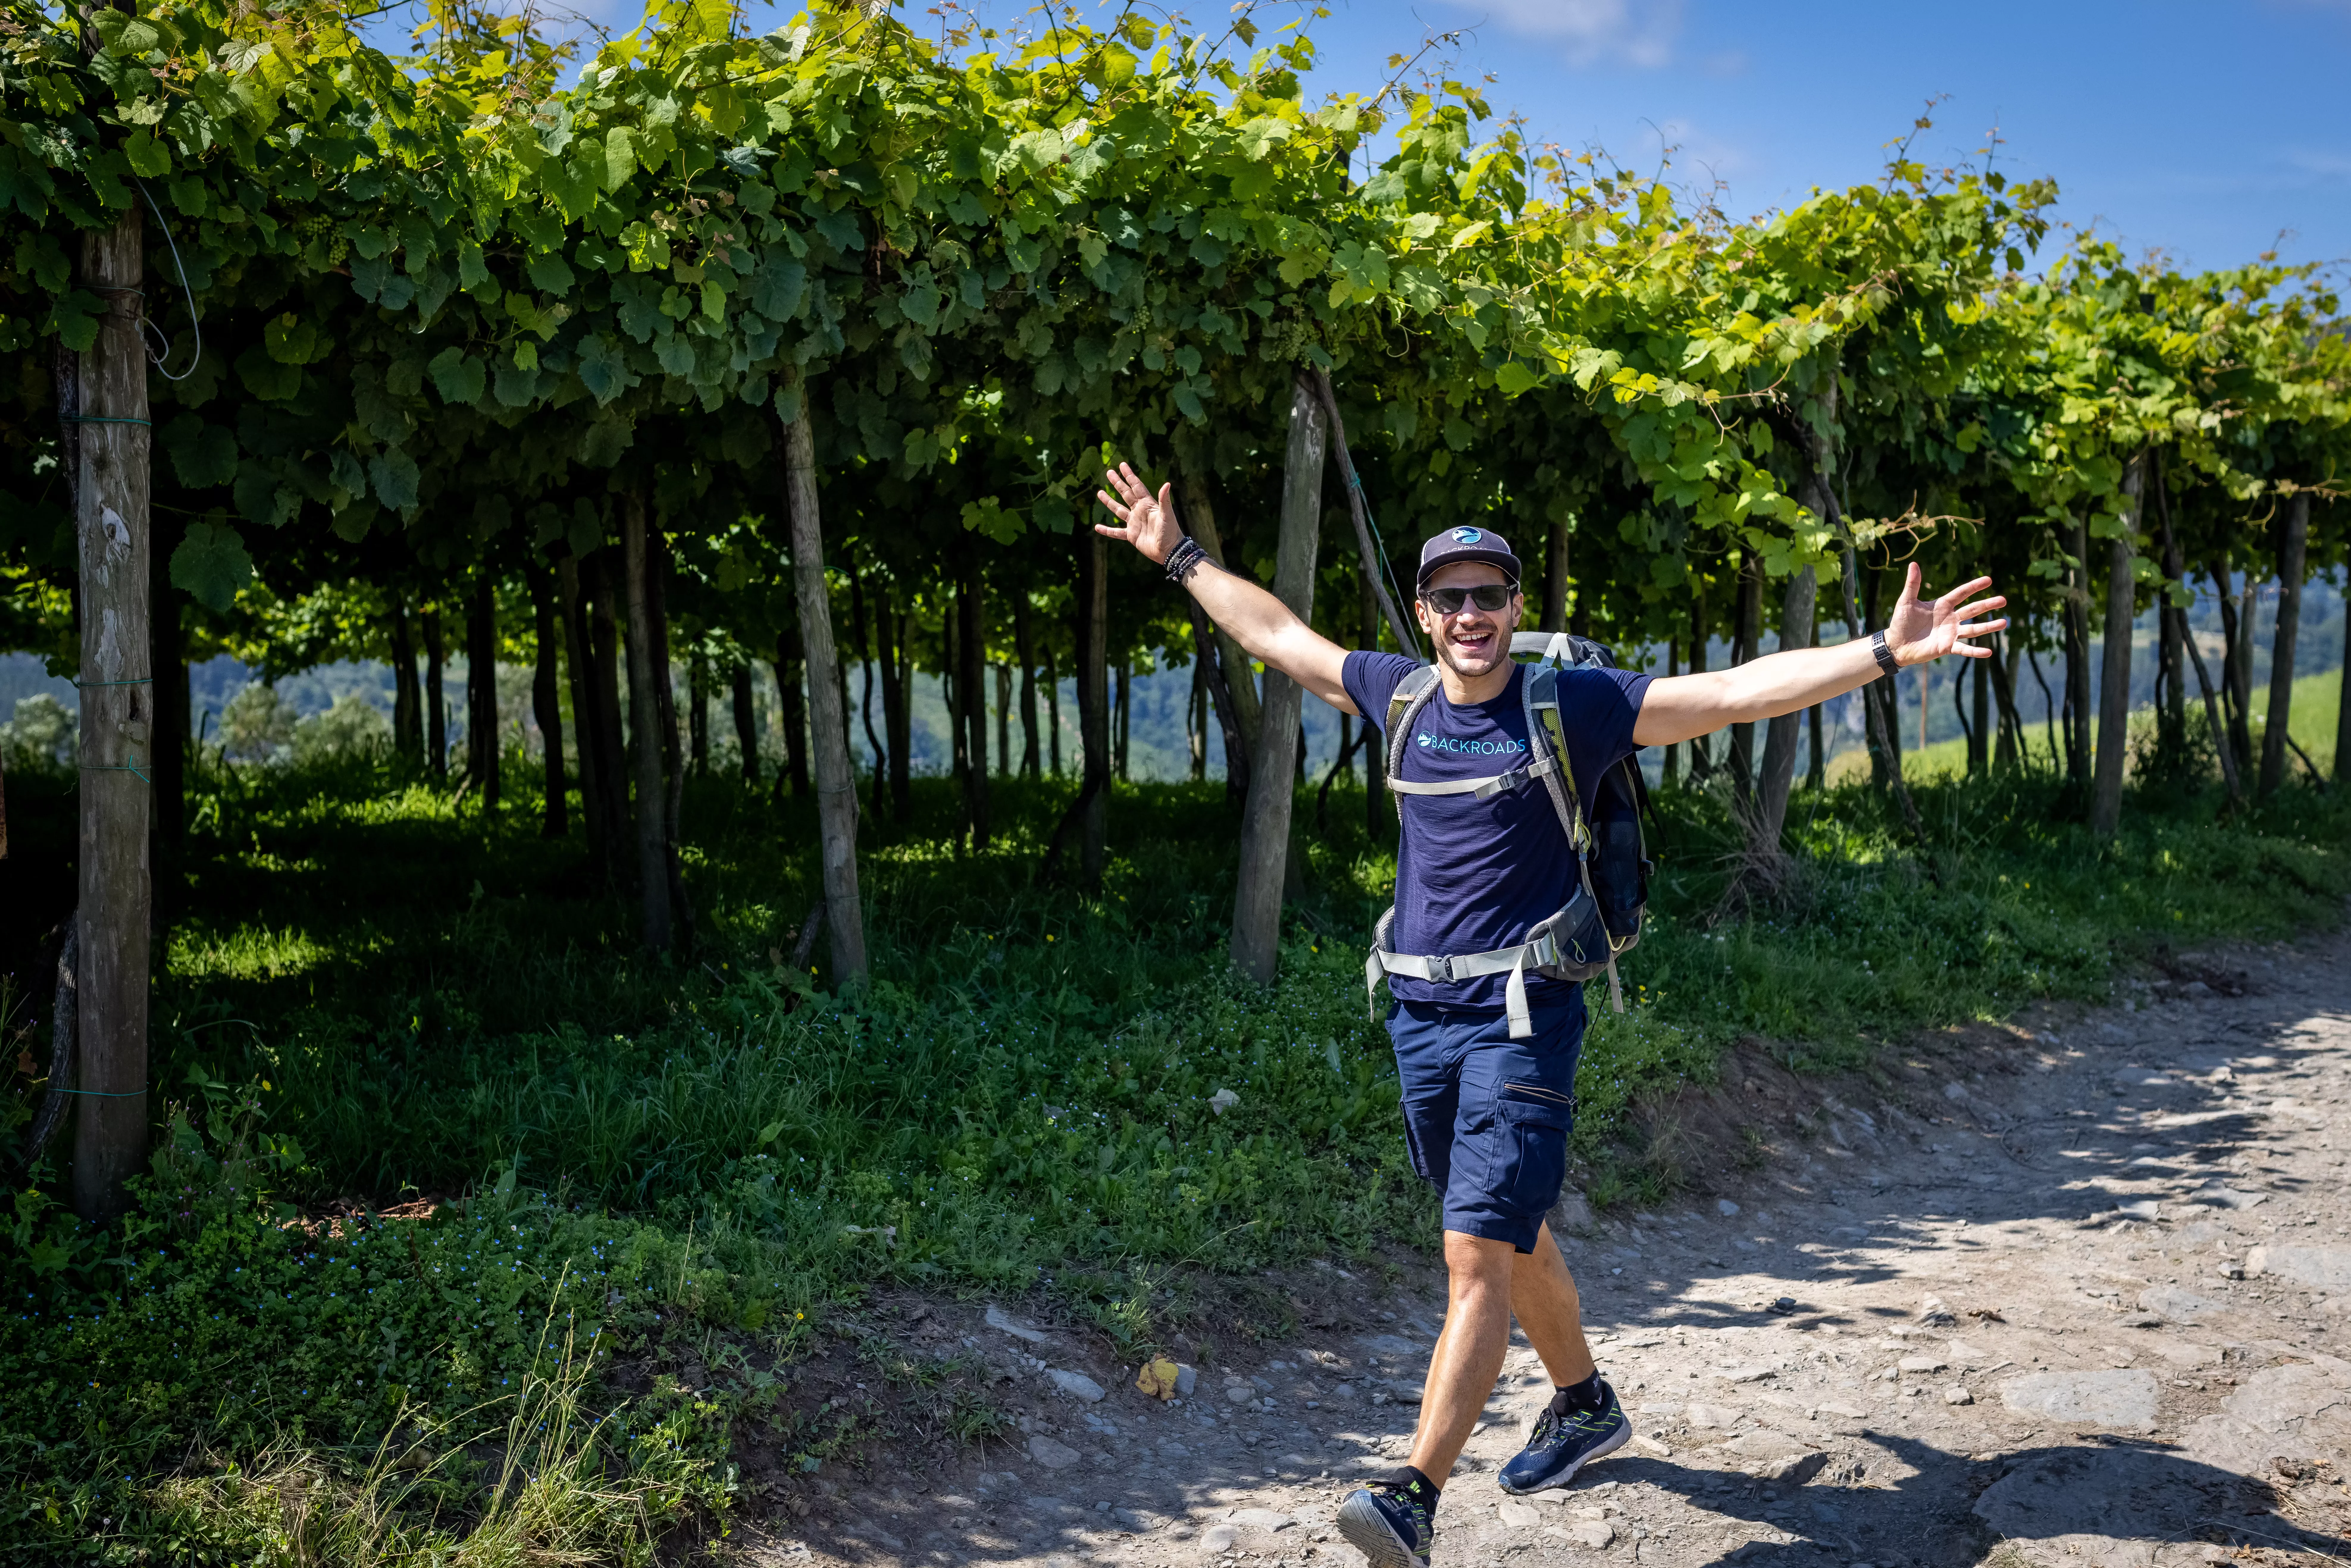 Leader walking past tall grapevines, arms outstretched.